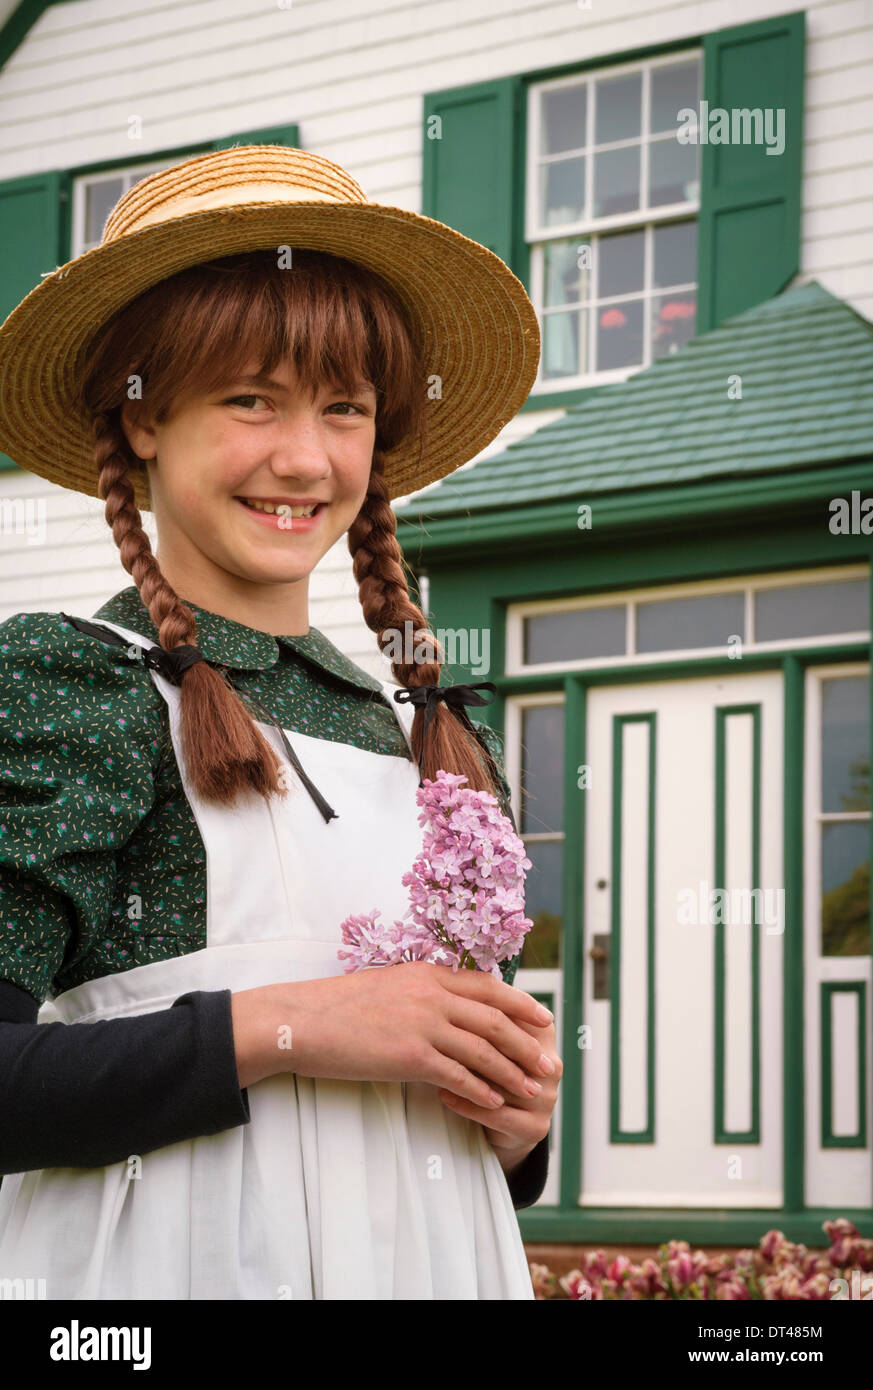 Andrea Hickey posing as Anne of Green Gables at the Green Gables house; Prince Edward Island, Canada. Stock Photo